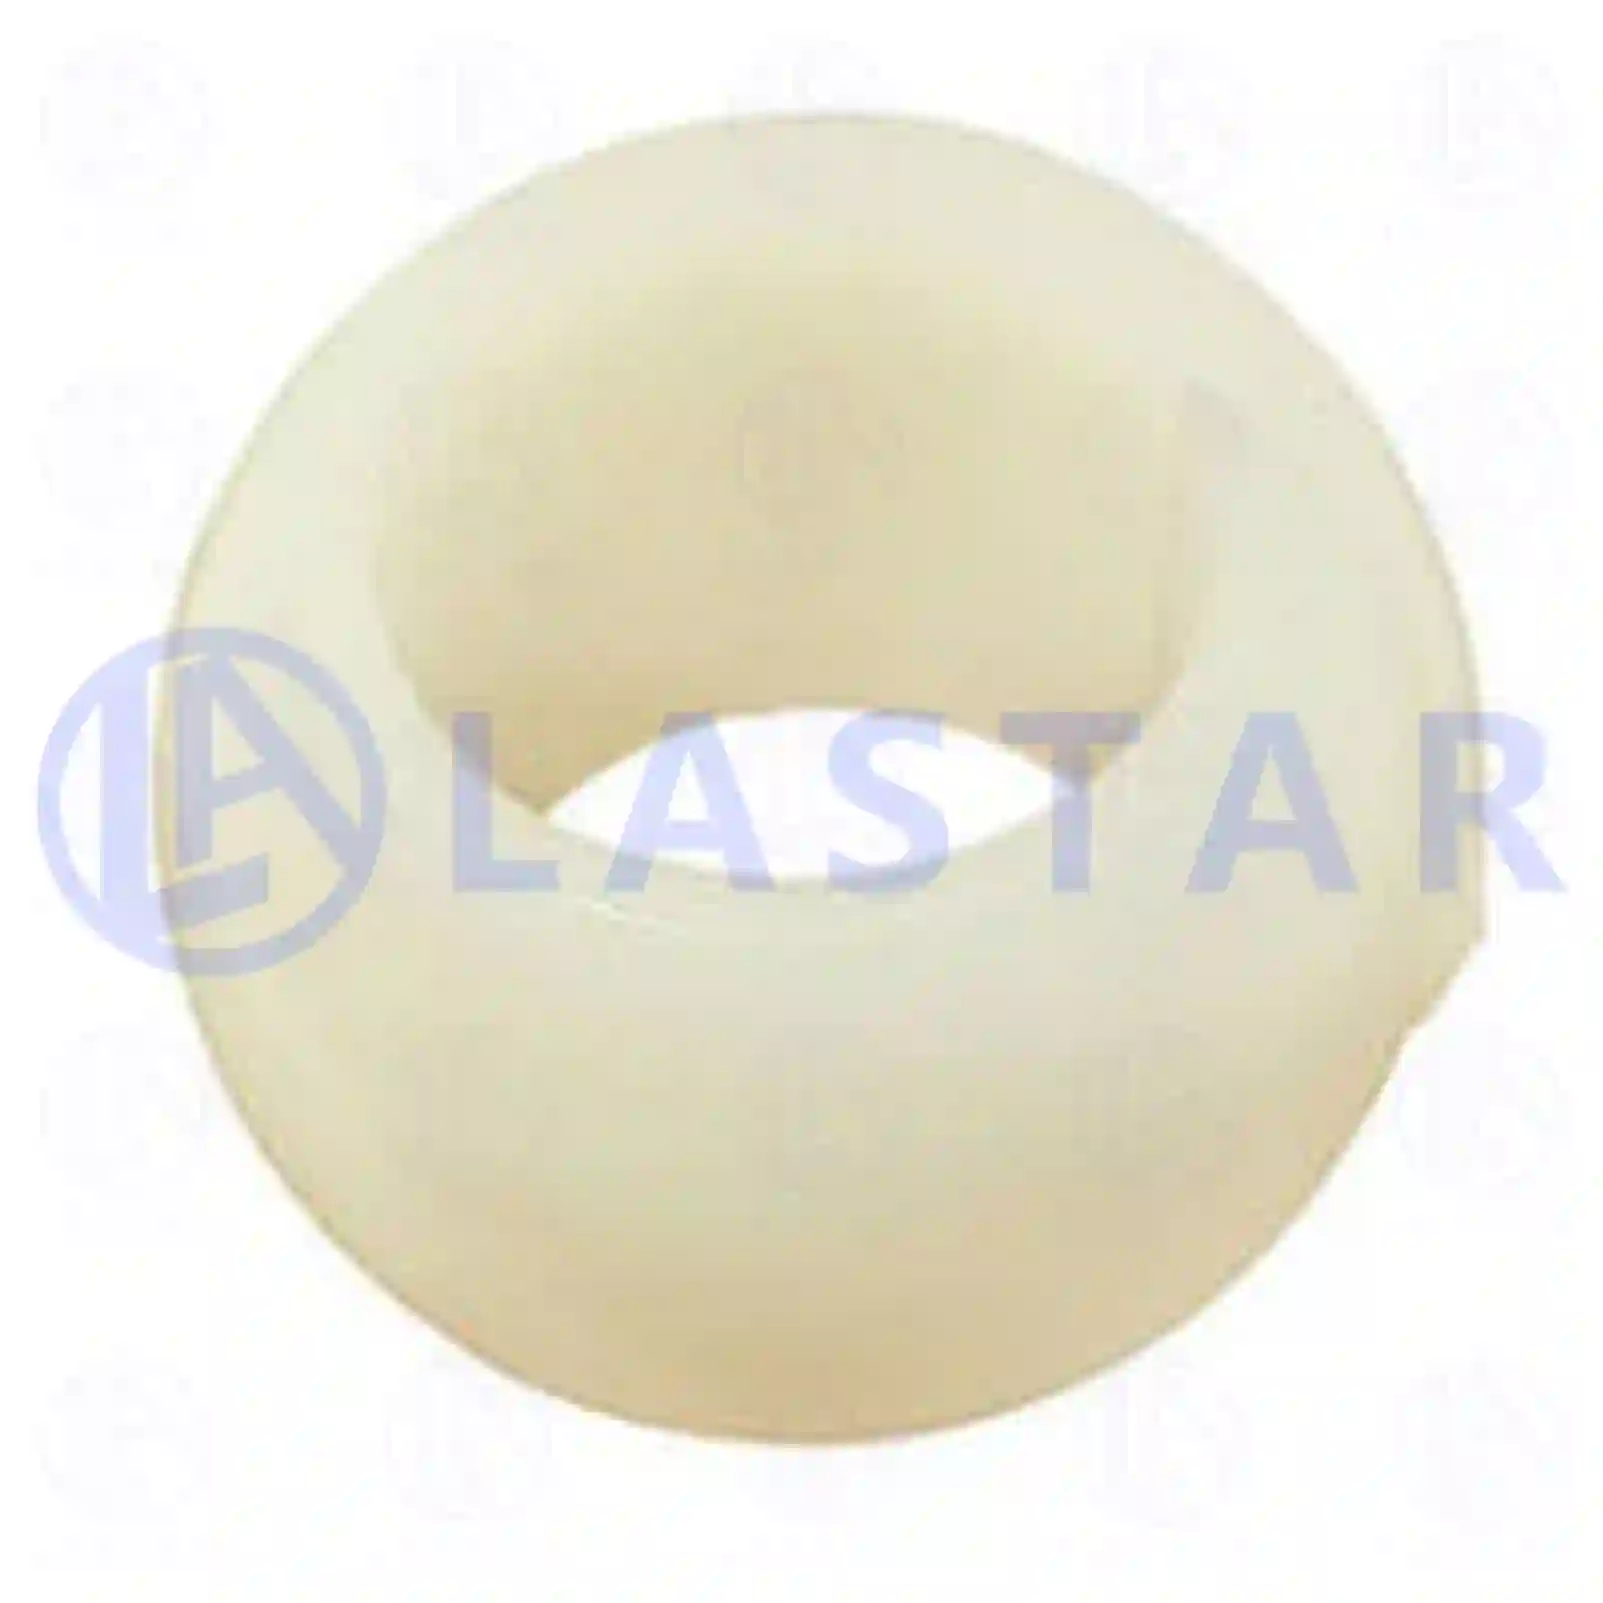 Bushing, stabilizer, 77728156, 9413260350, , , ||  77728156 Lastar Spare Part | Truck Spare Parts, Auotomotive Spare Parts Bushing, stabilizer, 77728156, 9413260350, , , ||  77728156 Lastar Spare Part | Truck Spare Parts, Auotomotive Spare Parts